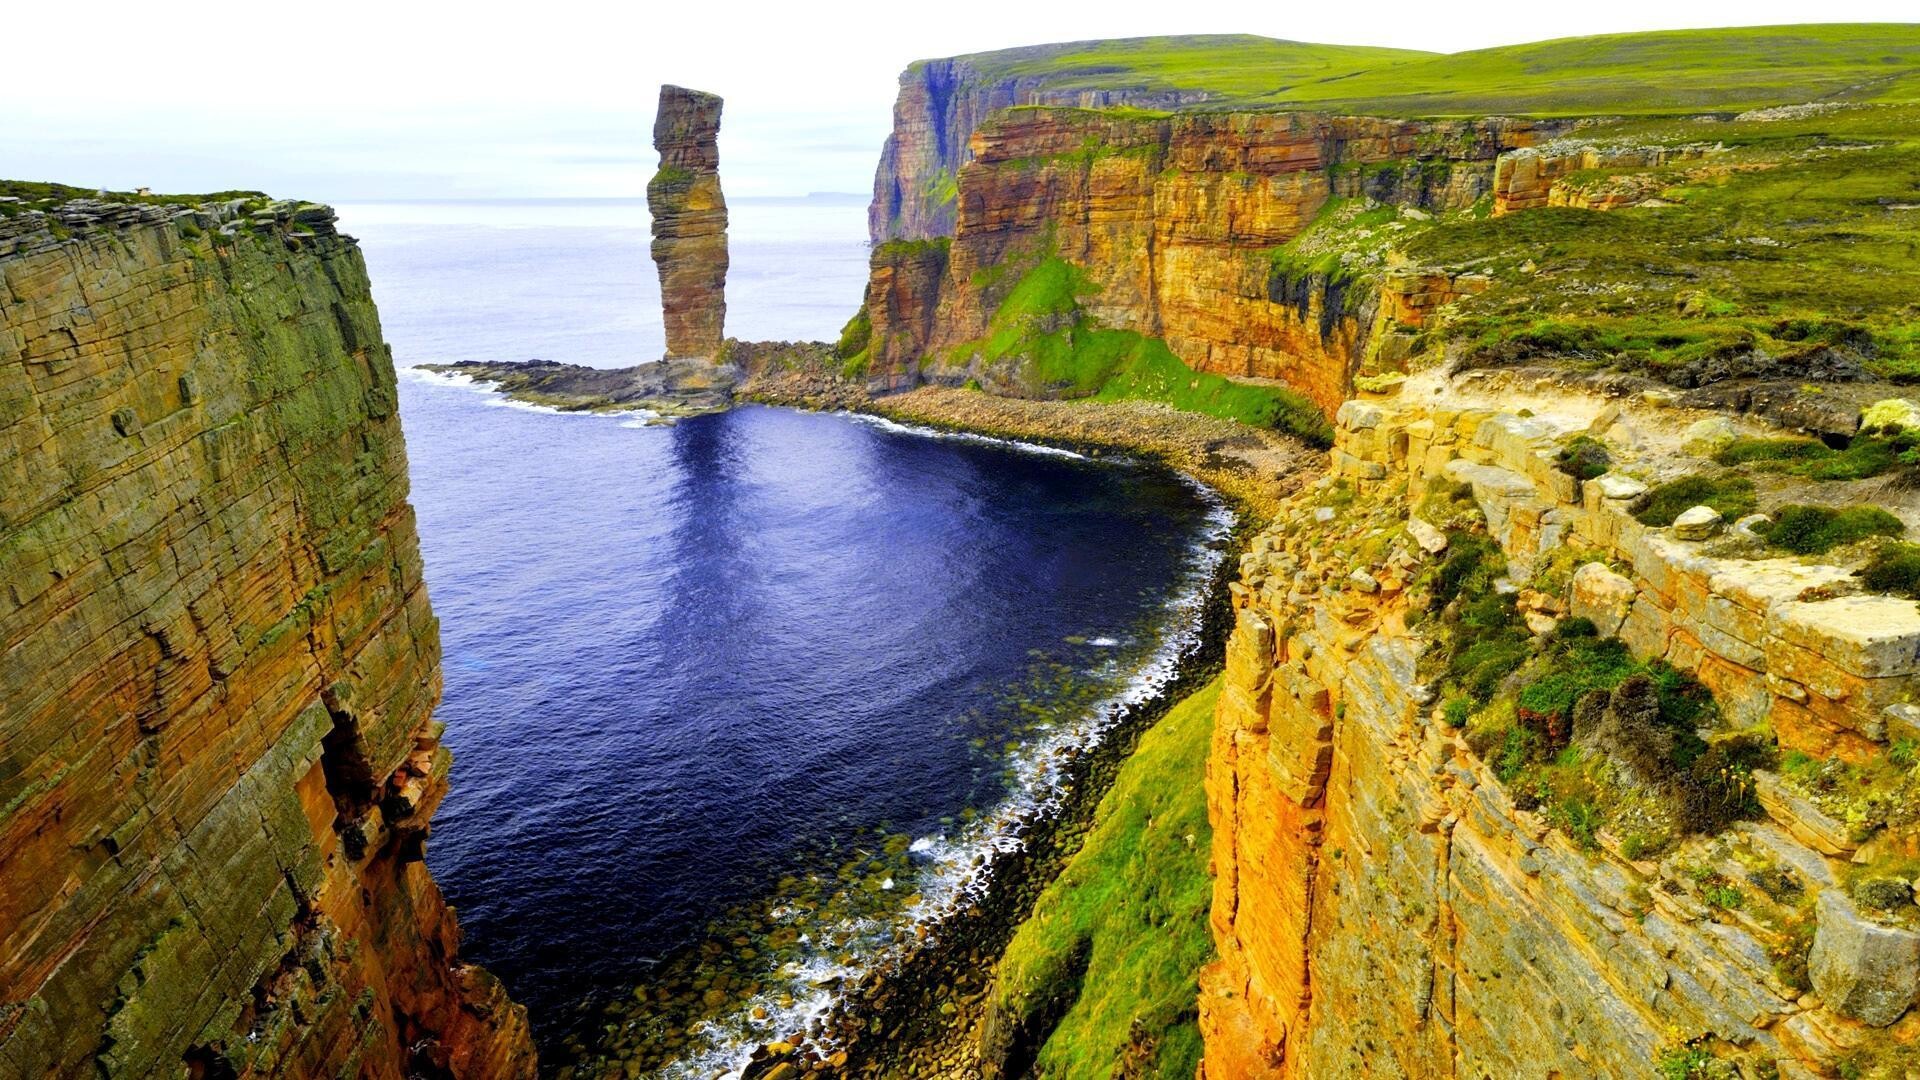 Geology: The fringe of land at the edge of a body of water, Cliff, Shore. 1920x1080 Full HD Wallpaper.